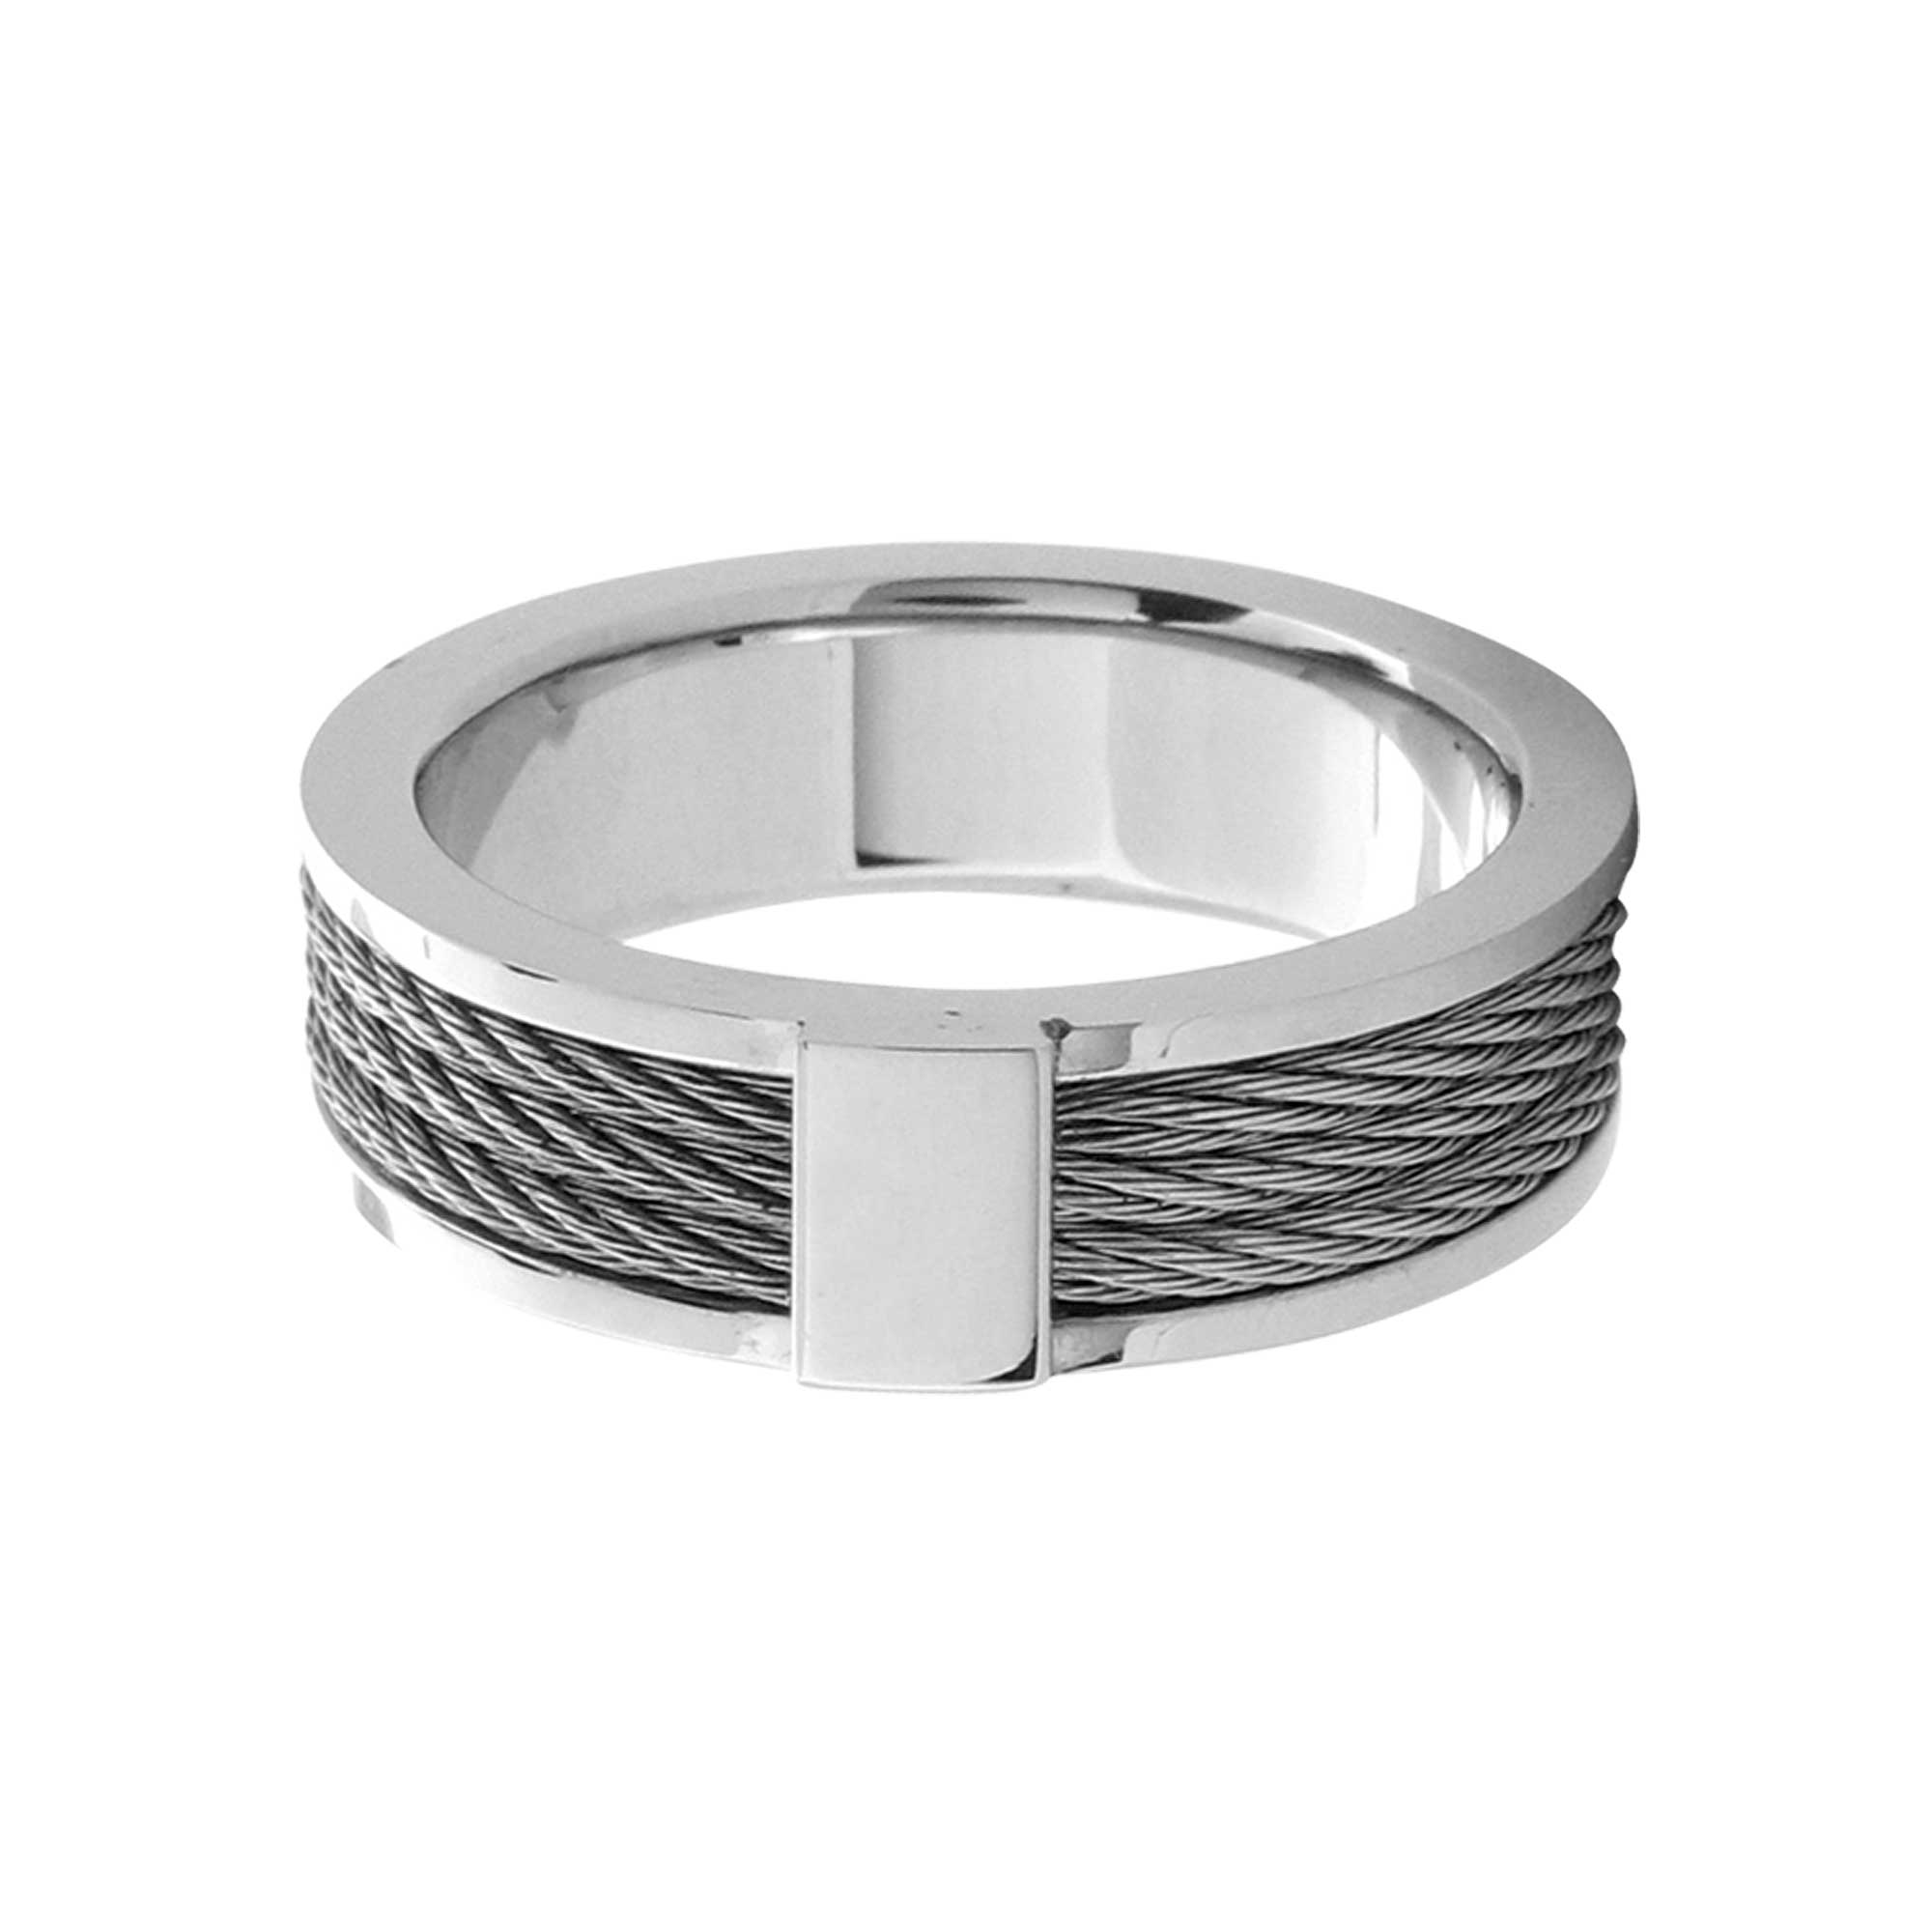 Steel Cable Inlayed Comfort Fit Ring Image 2 Lewis Jewelers, Inc. Ansonia, CT